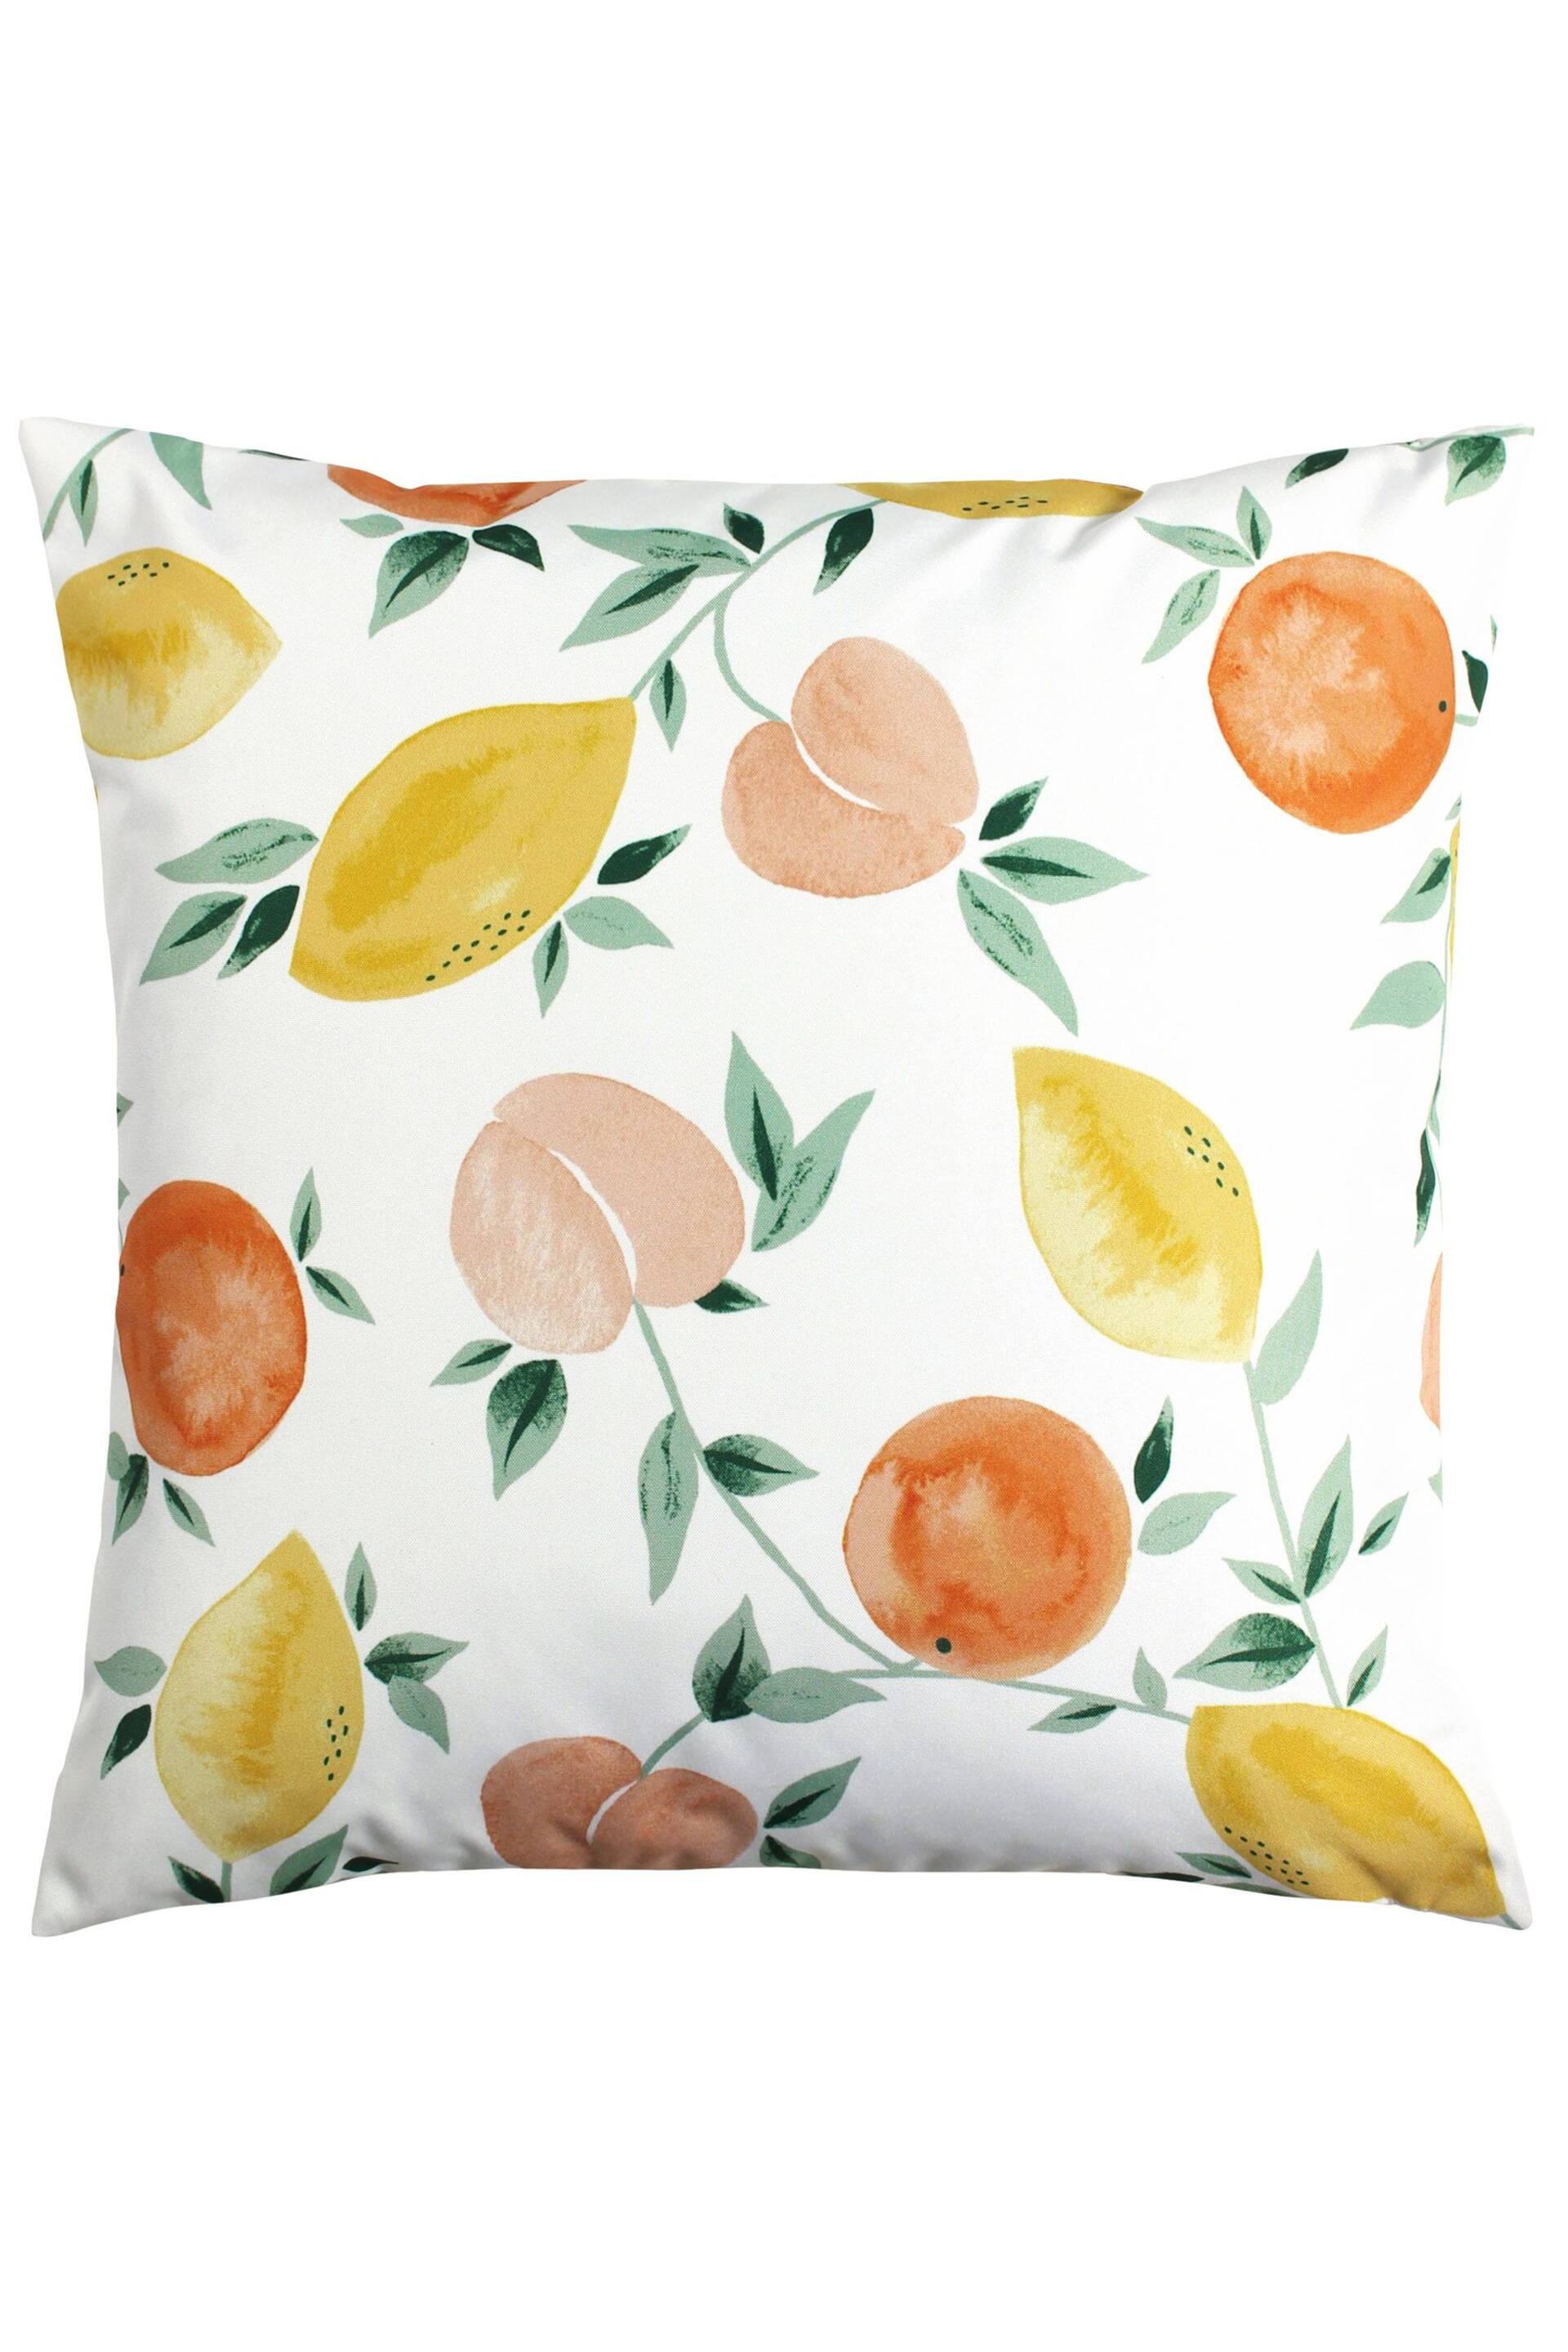 furn. White Les Fruits Water Resistant Outdoor Cushion - Image 3 of 4